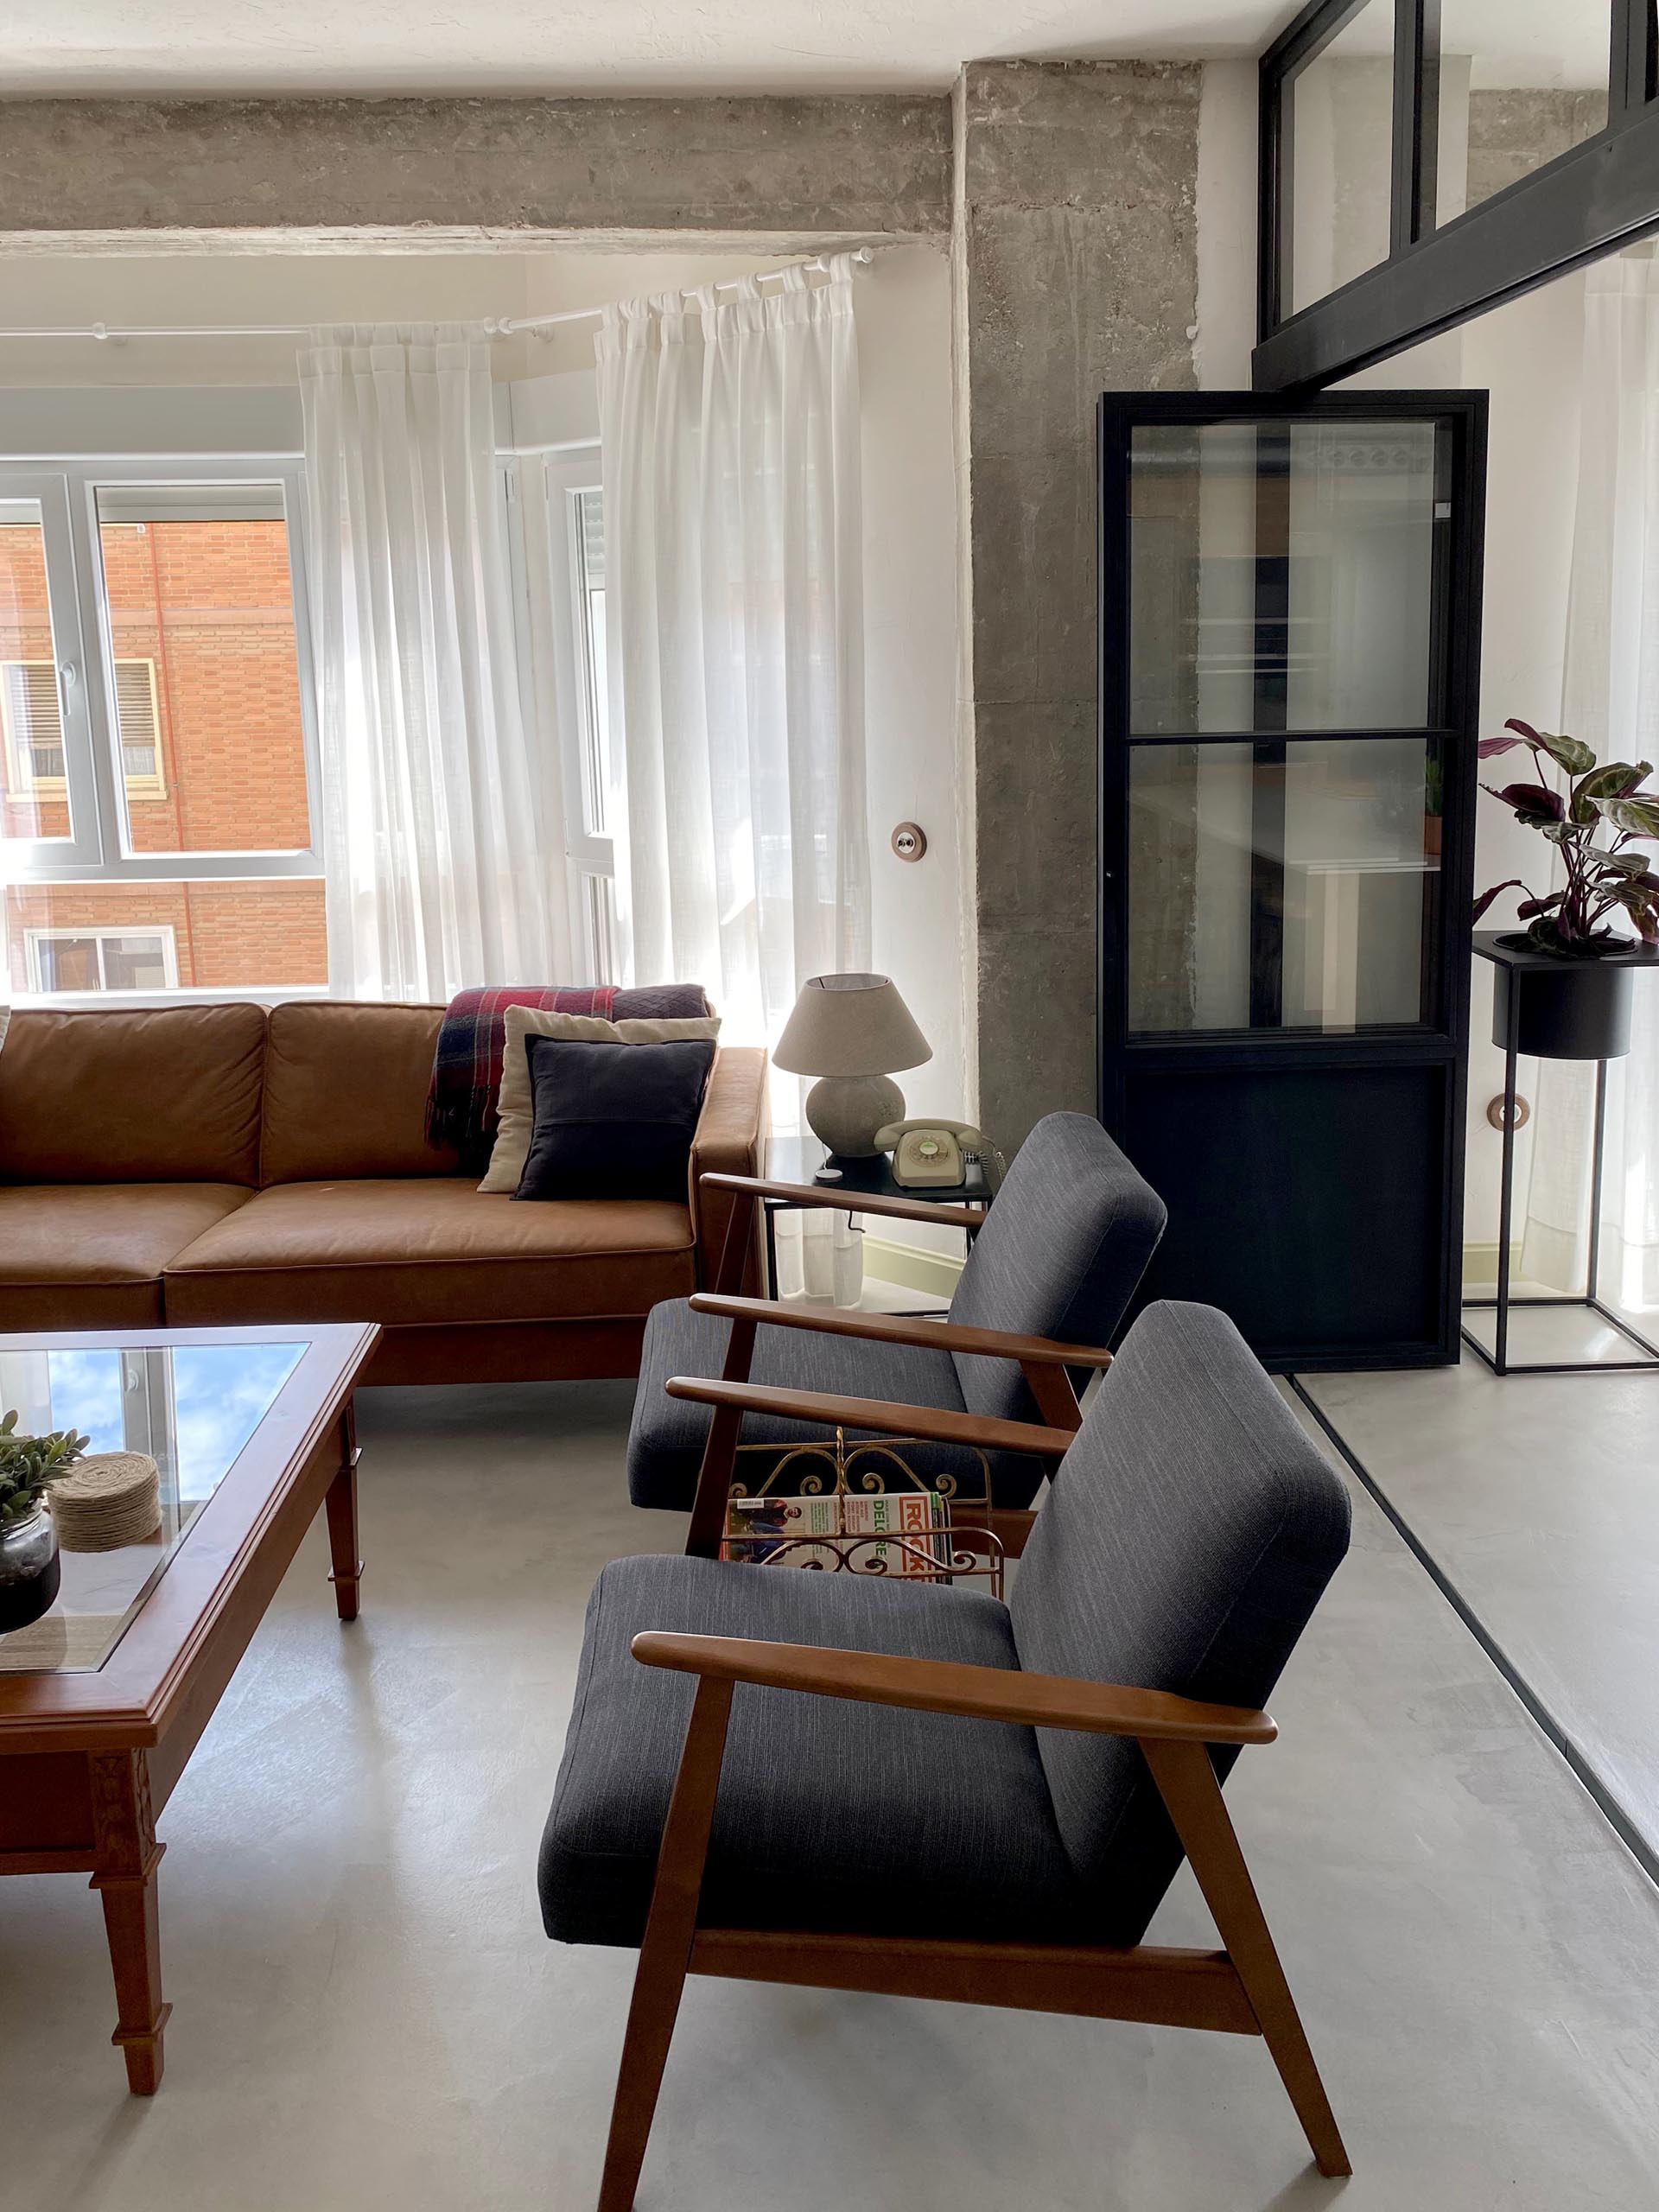 This modern living room showcases the concrete flooring, and is furnished with leather couches, a pair of armchairs, and a wood coffee table. On the living room wall, there's a low console and glass front cabinet that complements the black framed doors.